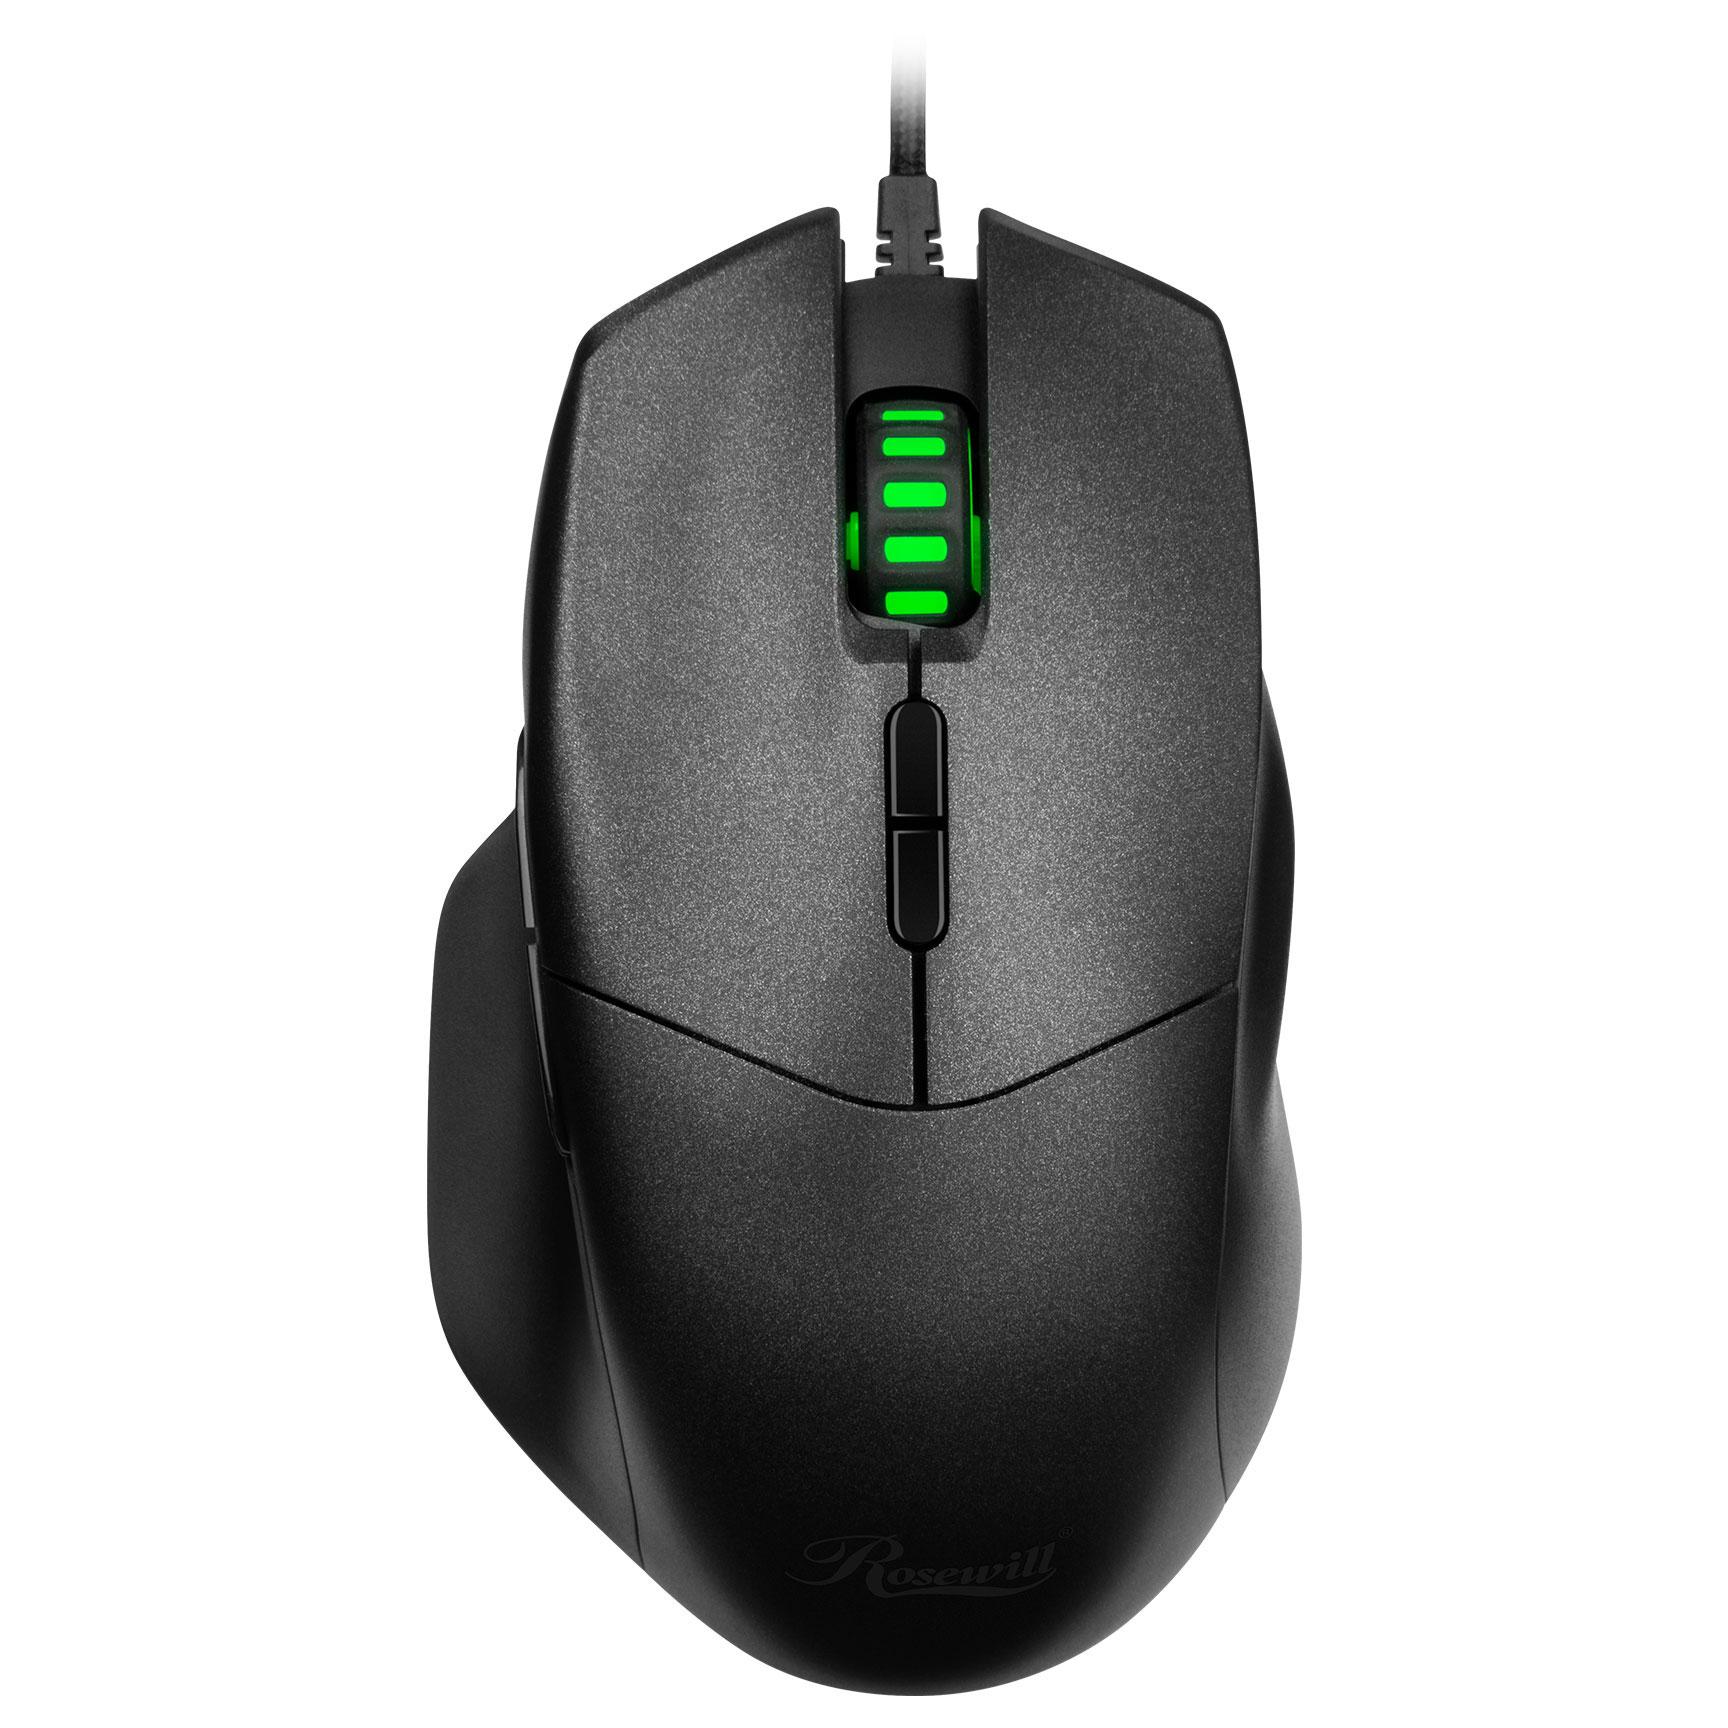 Rosewill Ion D12 4000 DPI Optical Gaming Mouse for $9.99 Shipped